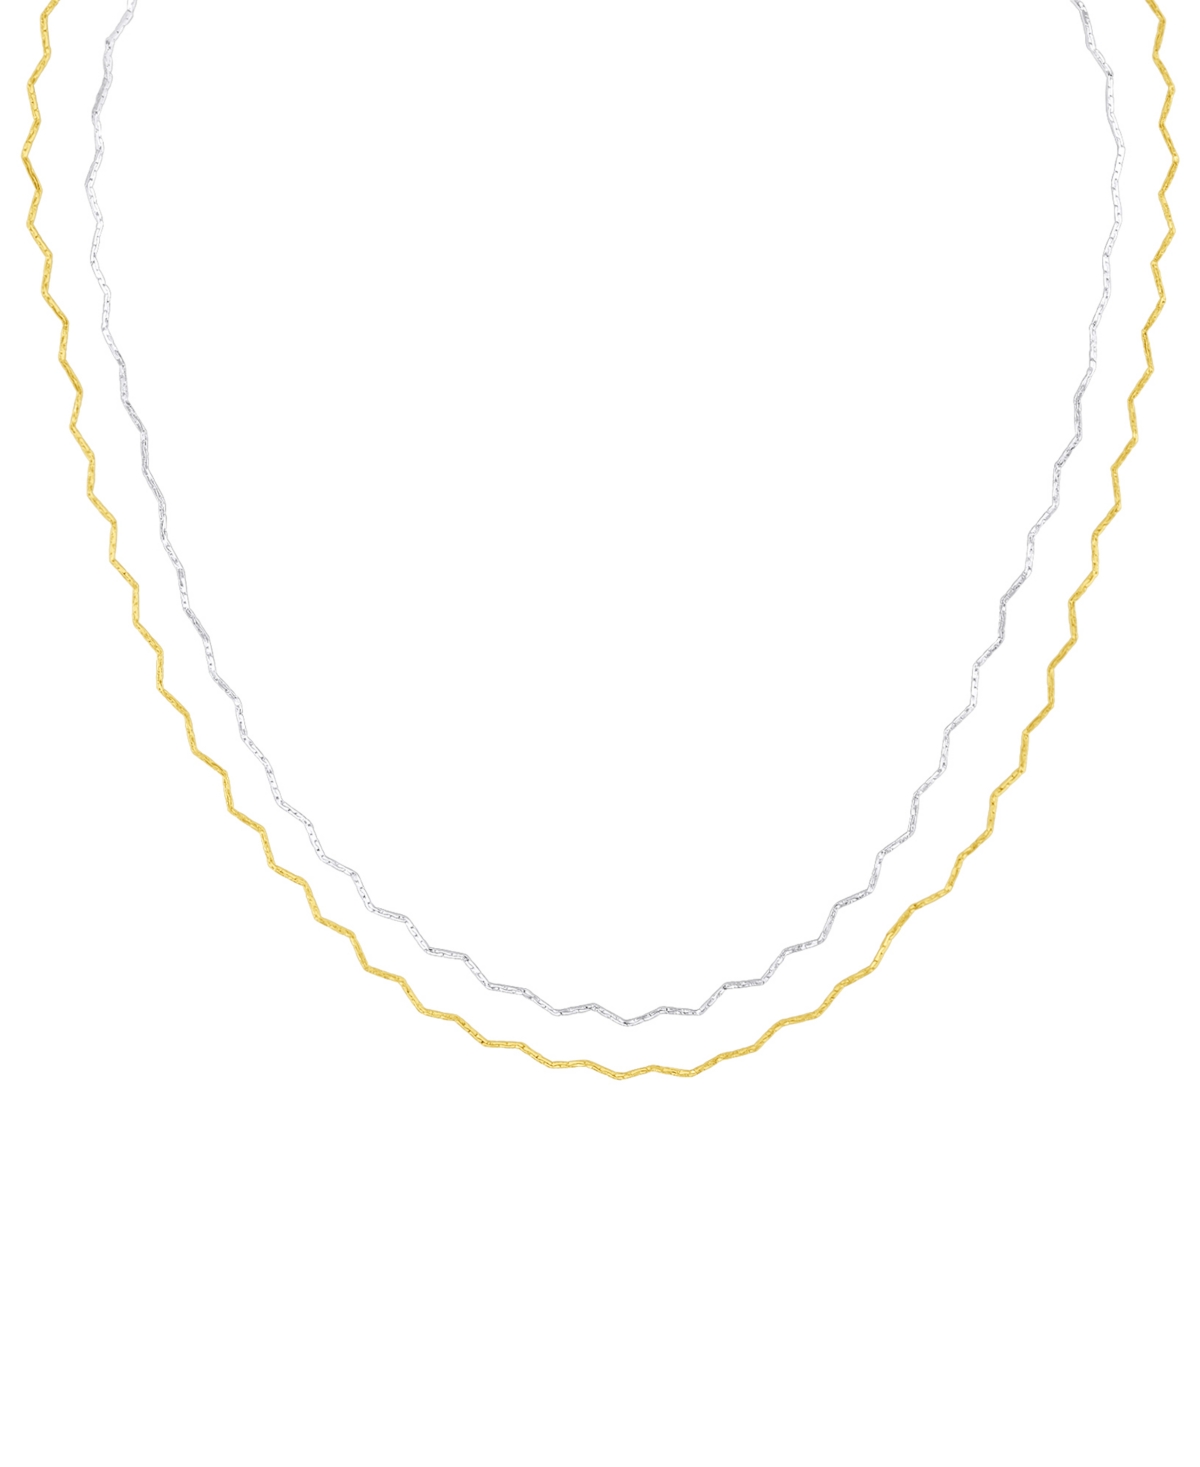 Silver-Plated and 18K Gold-Plated Zigzag Double Strand Chain Necklace - Two Tone